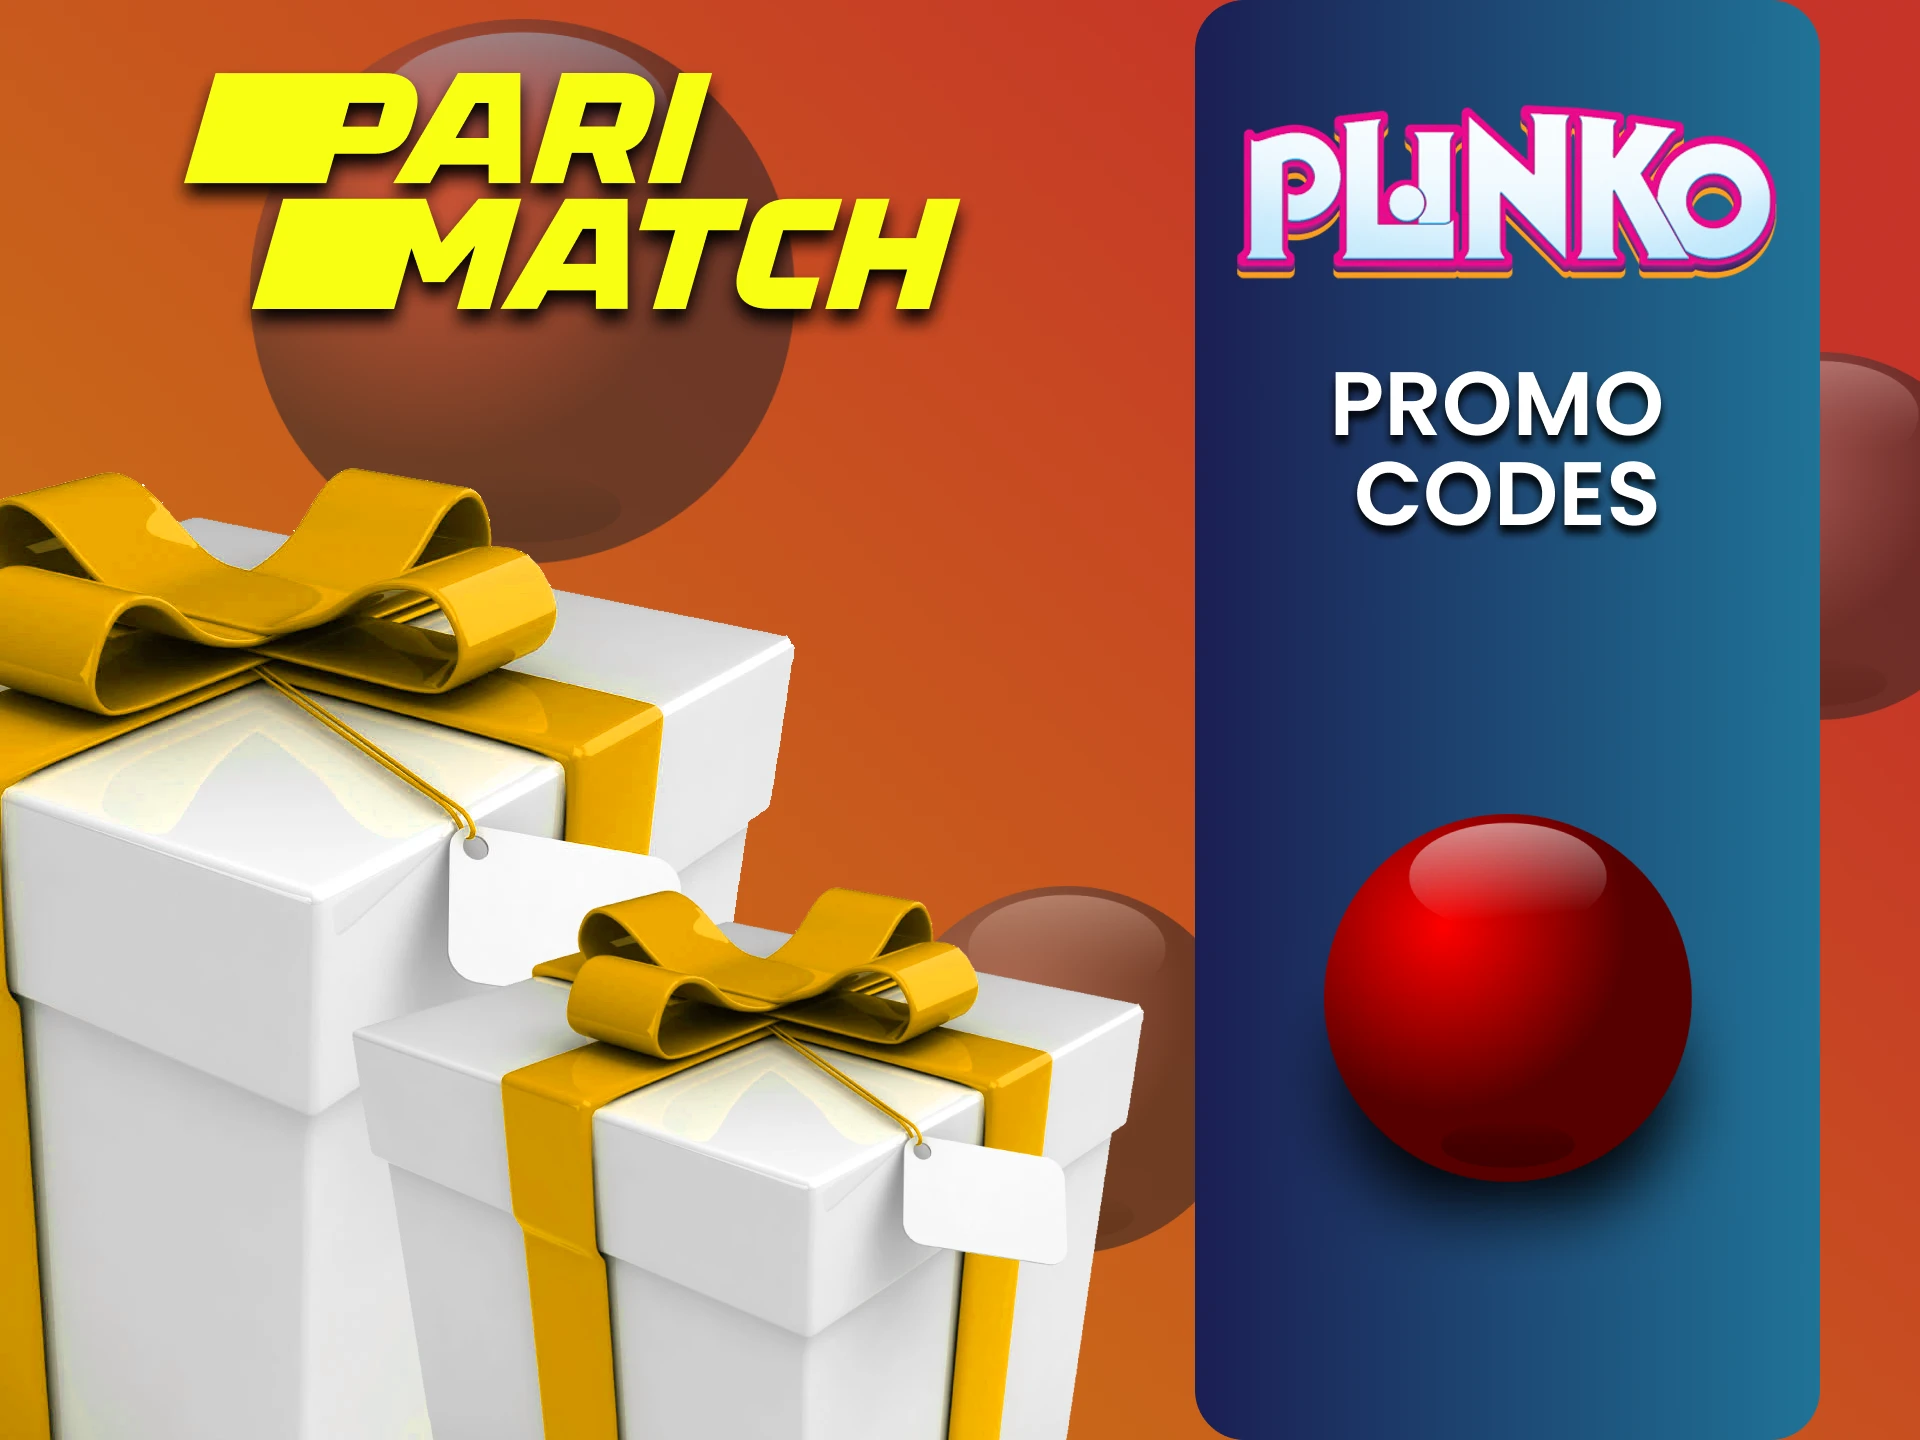 Before playing Plinko at Parimatch use a promo code.